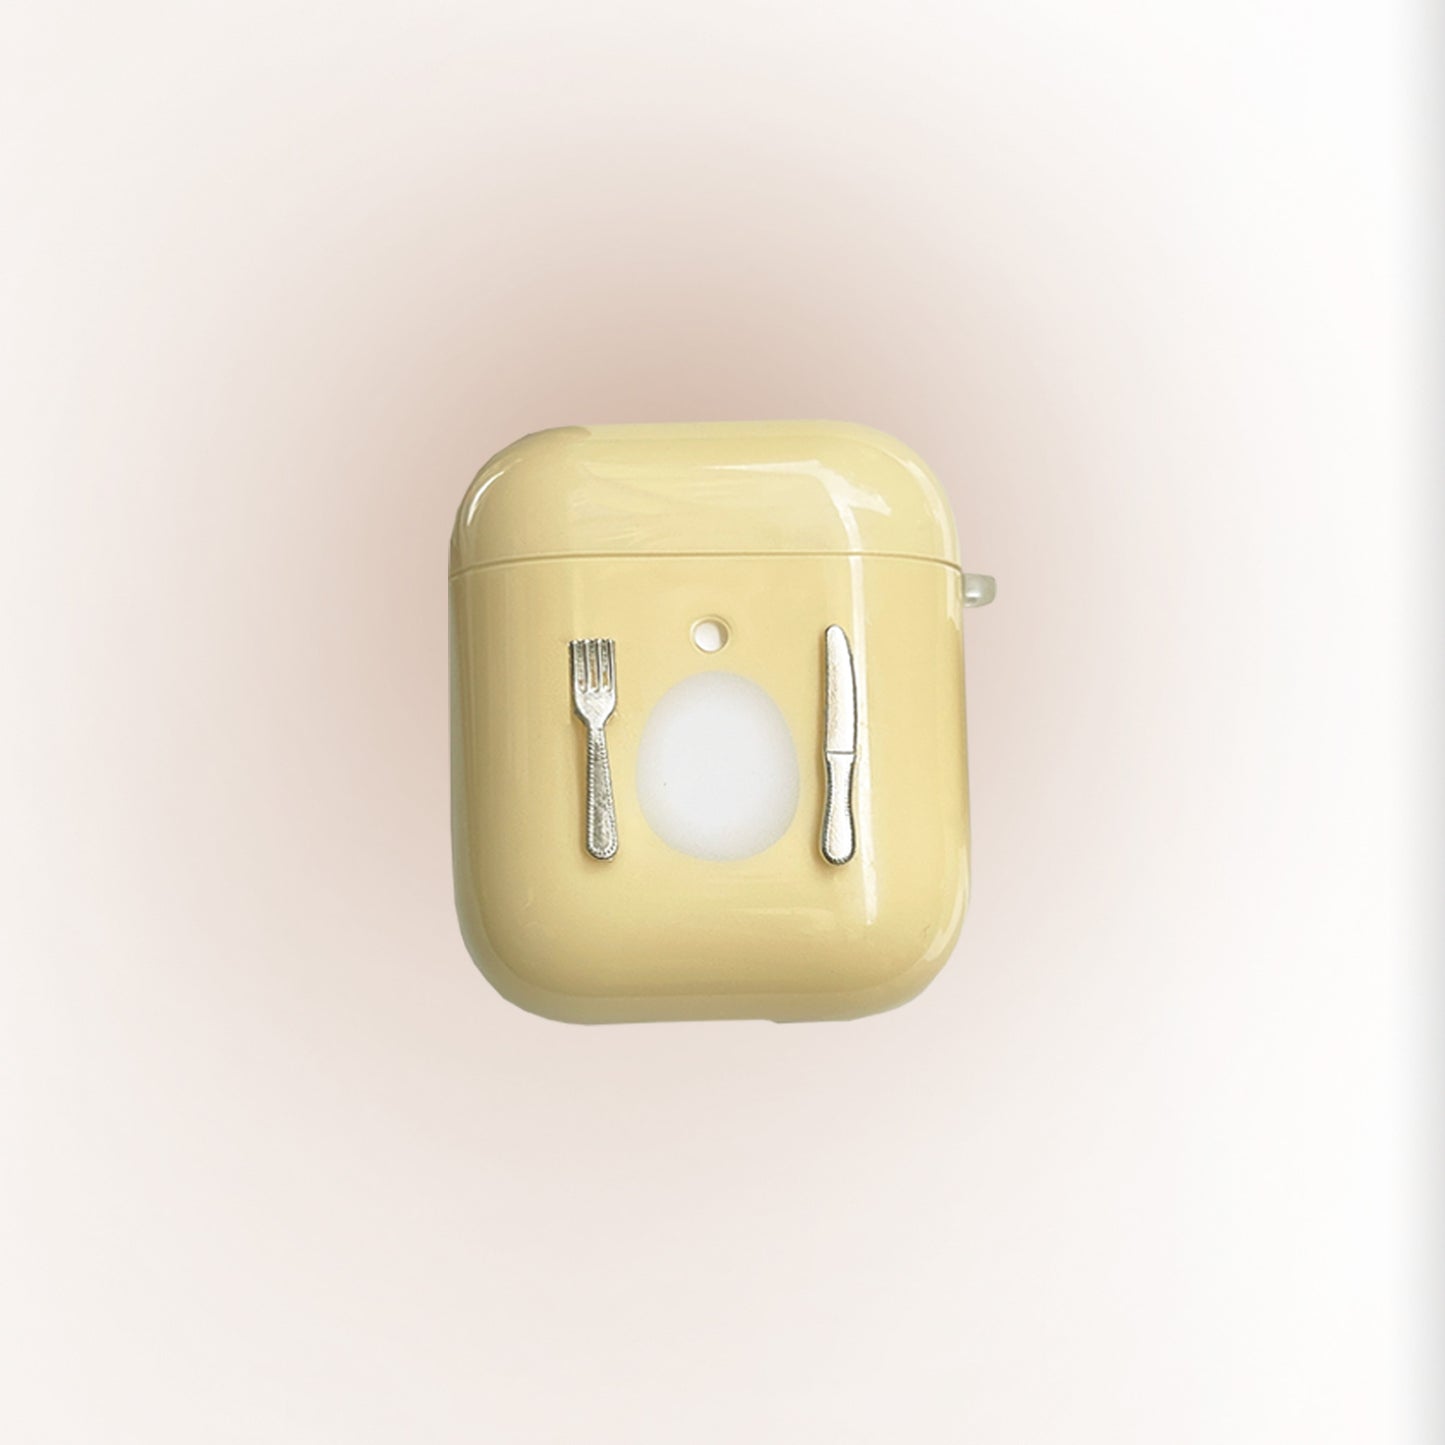 “Breakfast Plate” AirPods Case